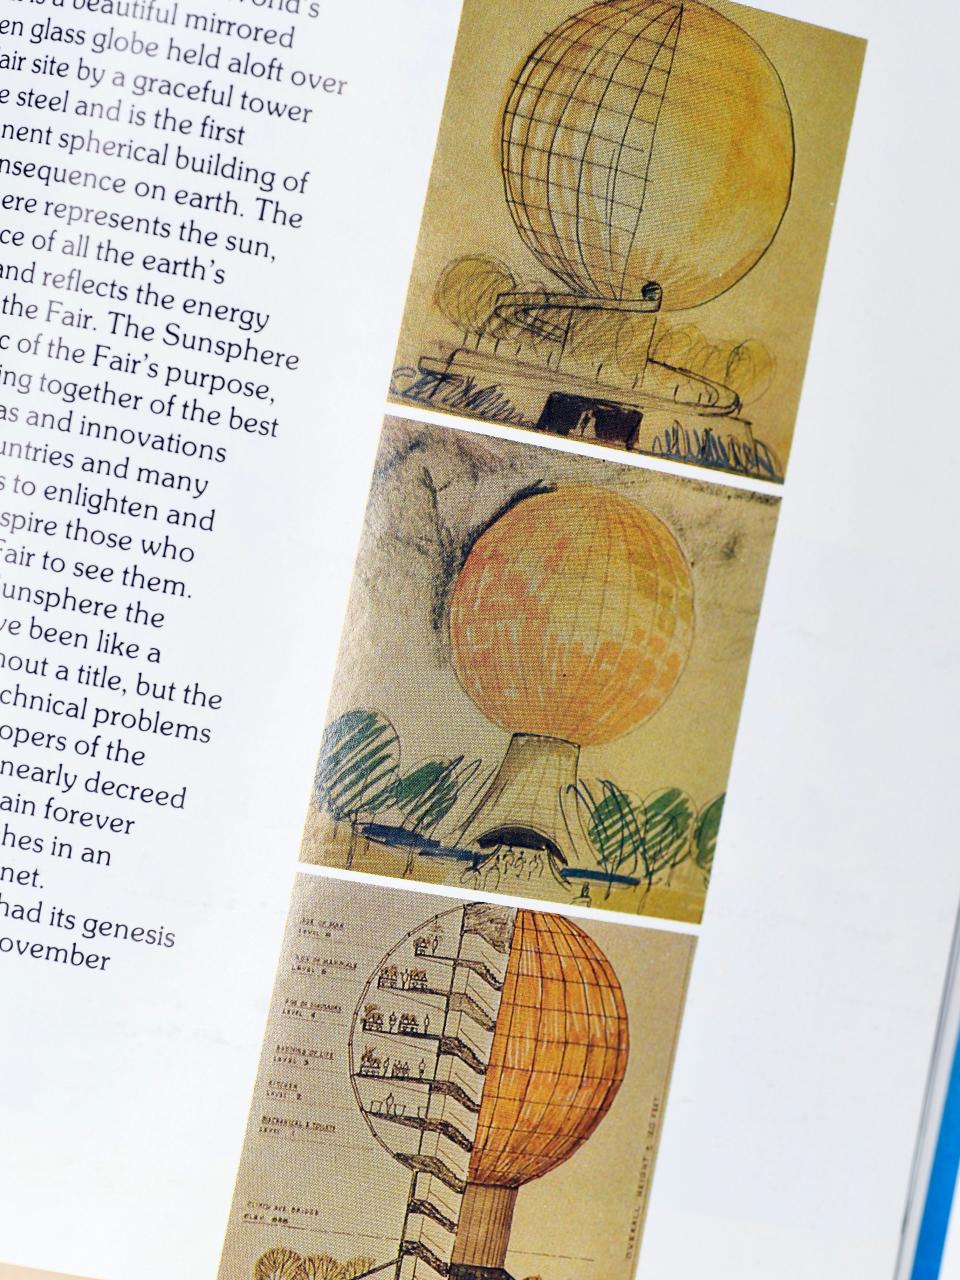 Community Tectonics Architects produced a book in 1982 all about World's Fair monuments and featured early drawings of the Sunsphere, including designs that showed the sphere much larger and attached to a pedestal not so high off the ground.